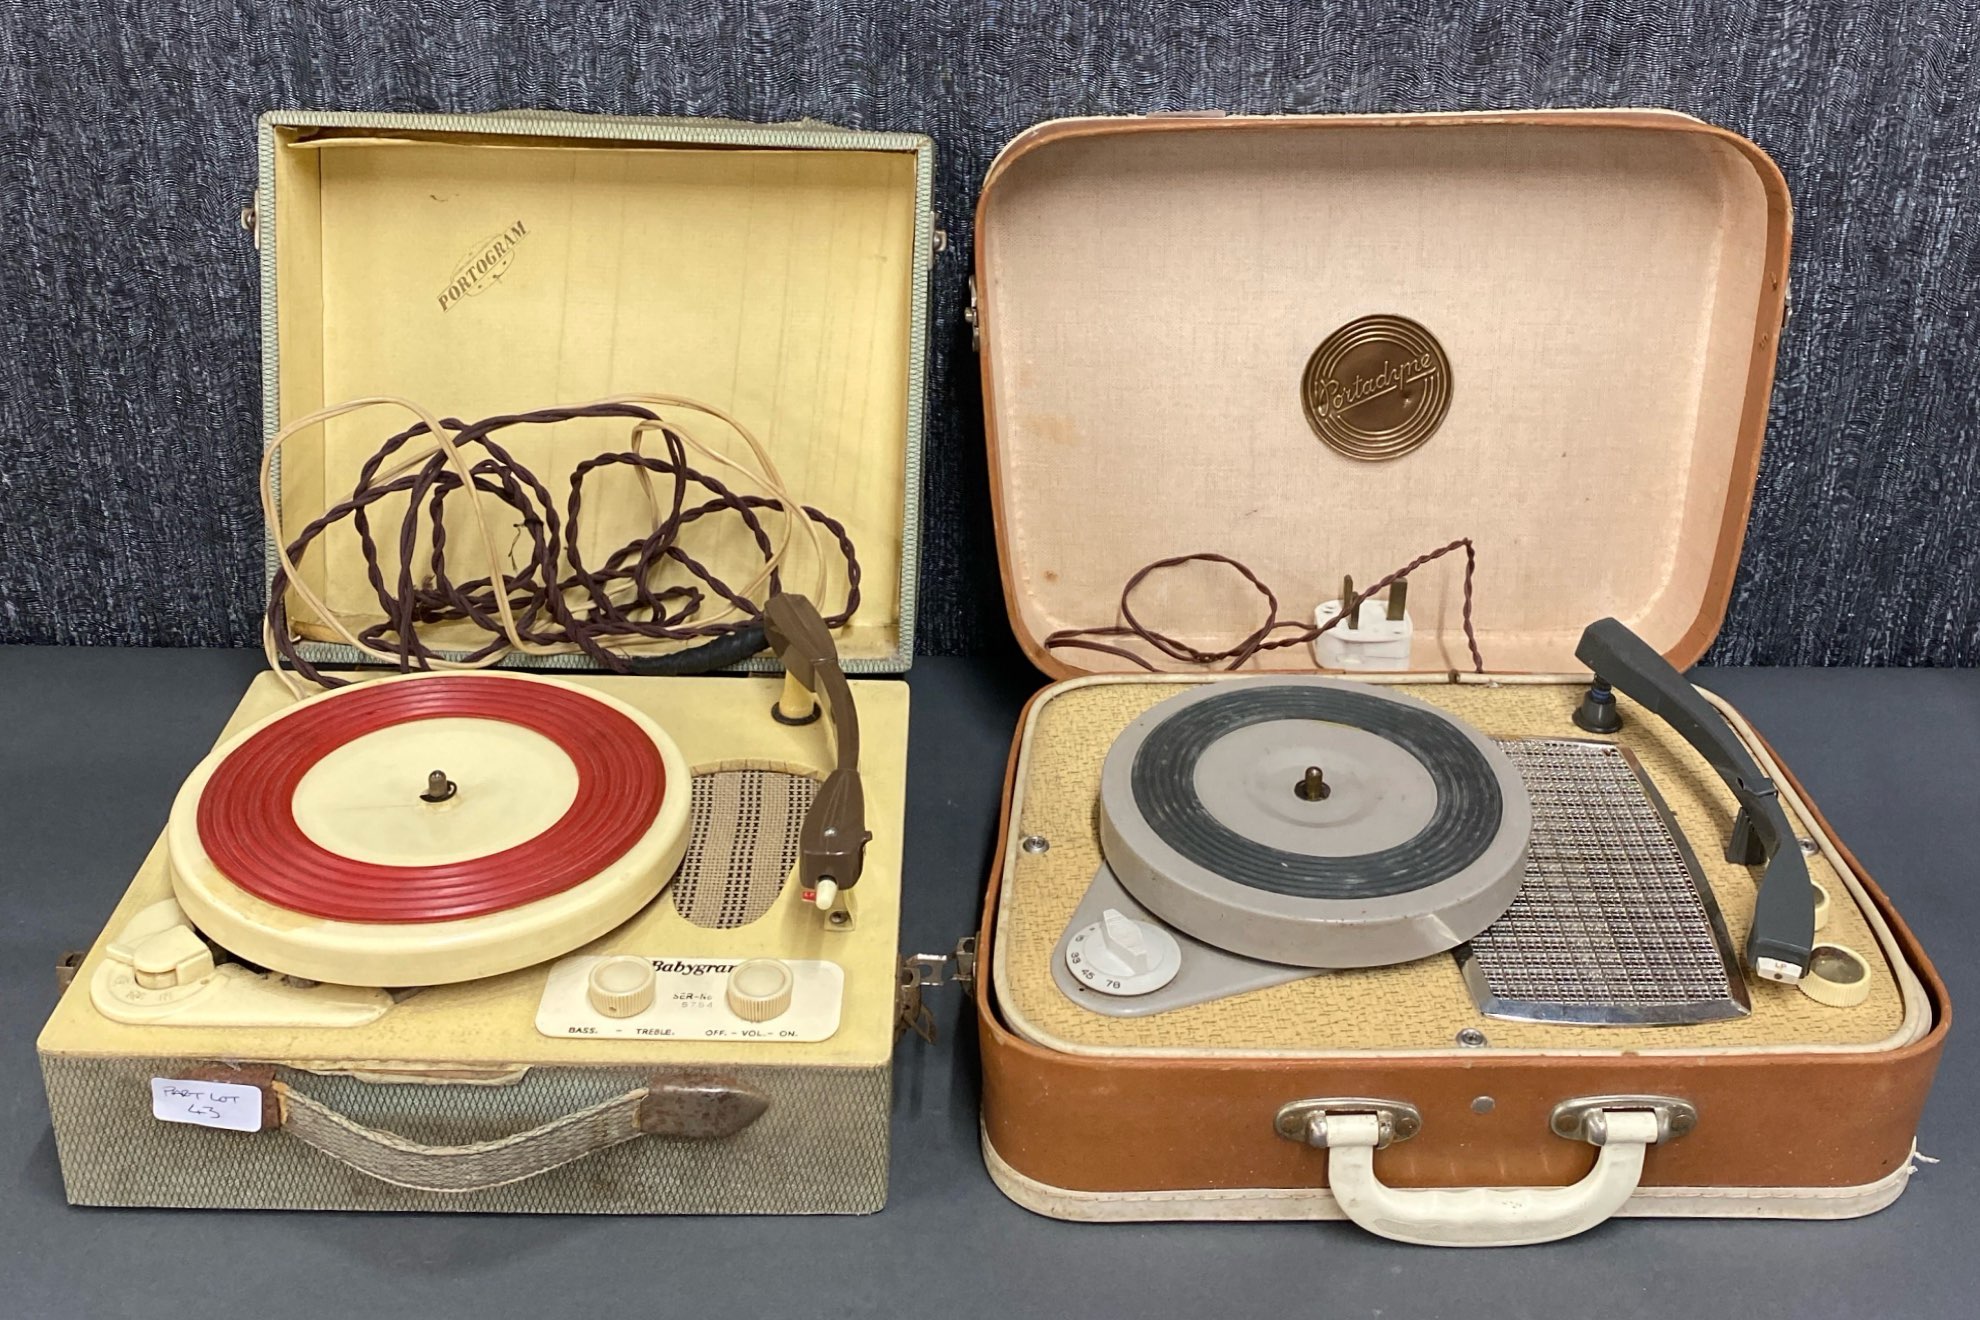 A cased Portandyne together with a cased Portagram serial number 5754, portable record players.